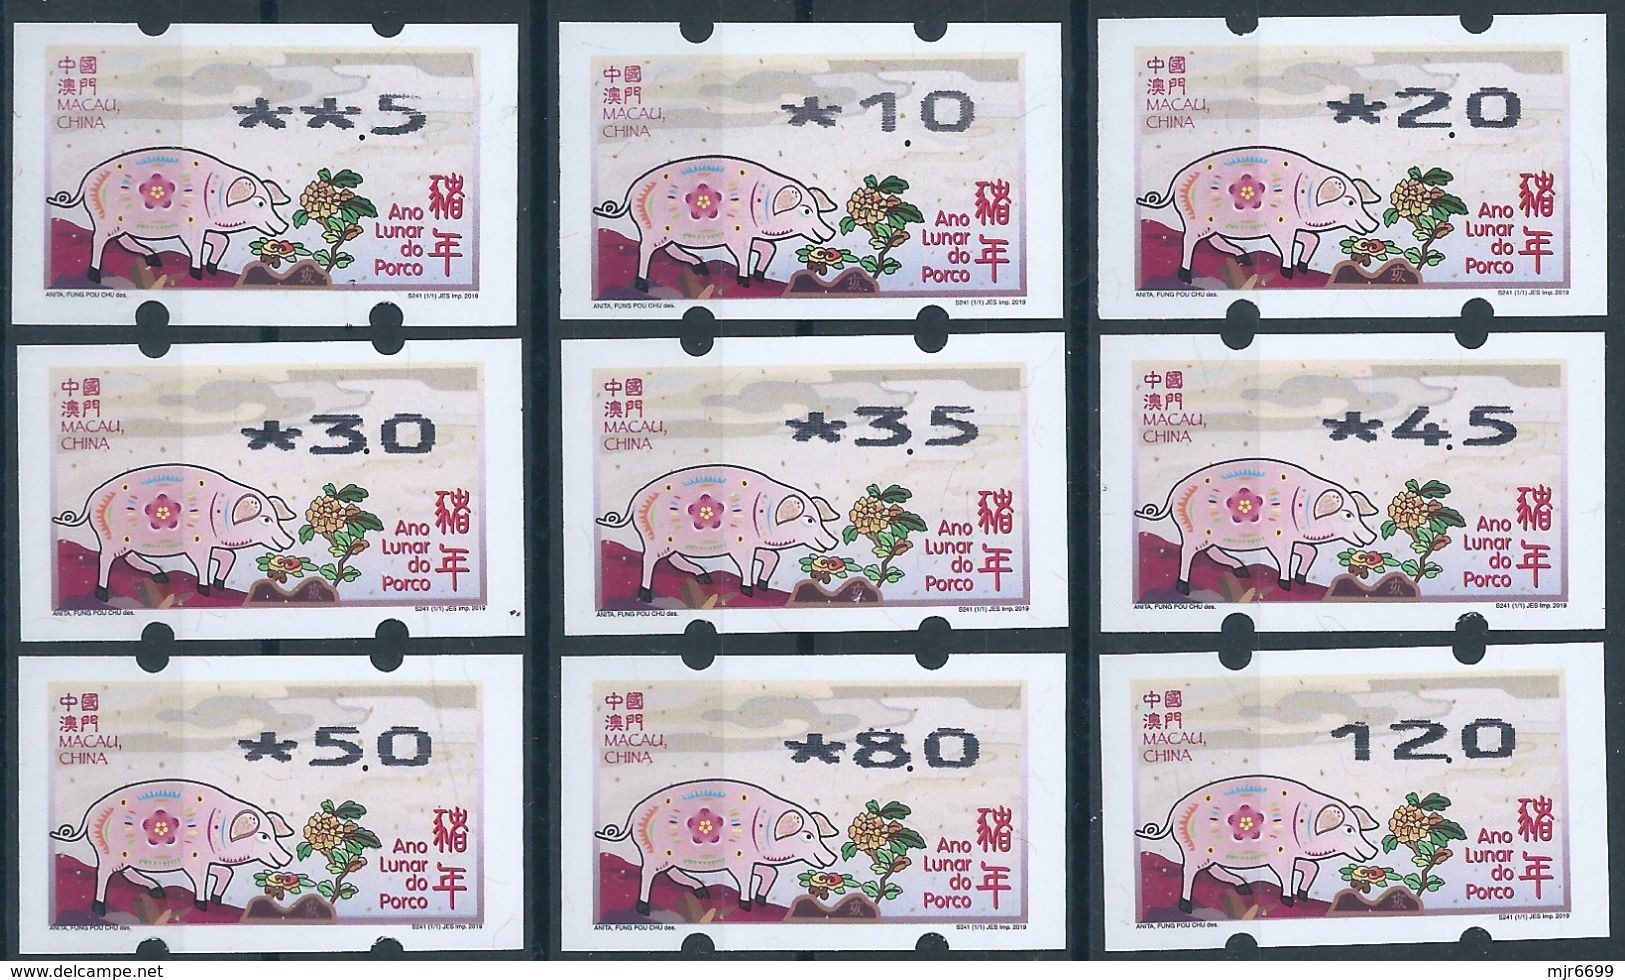 MACAU 2019 ZODIAC YEAR OF THE PIG ATM LABELS NAGLER SET OF 9 VALUES - Automatenmarken